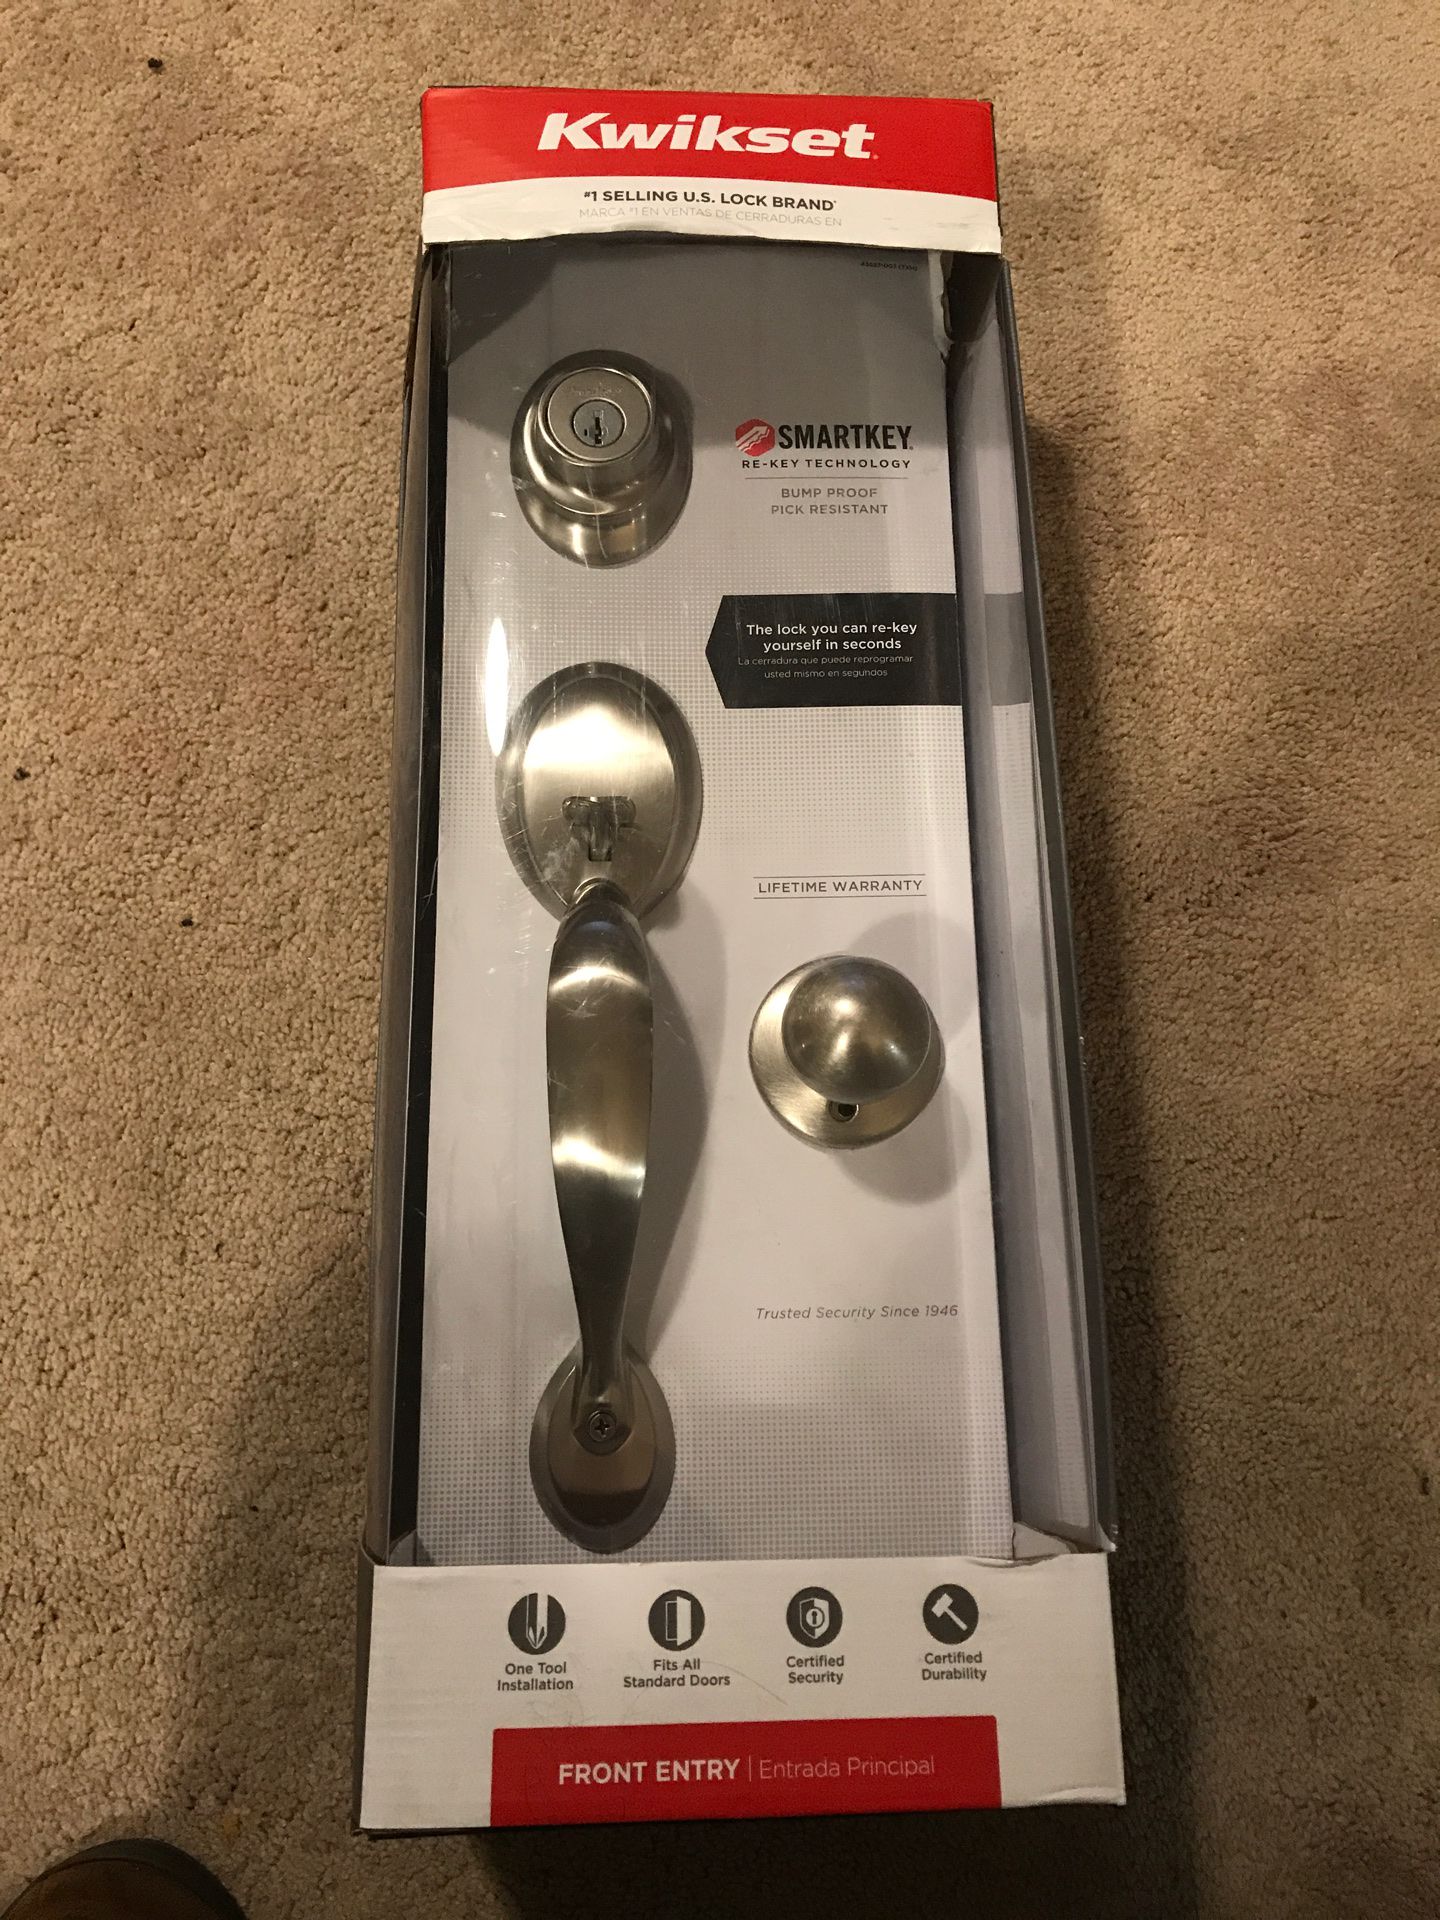 Brand new Kwikset satin nickel front entry with smart key technology